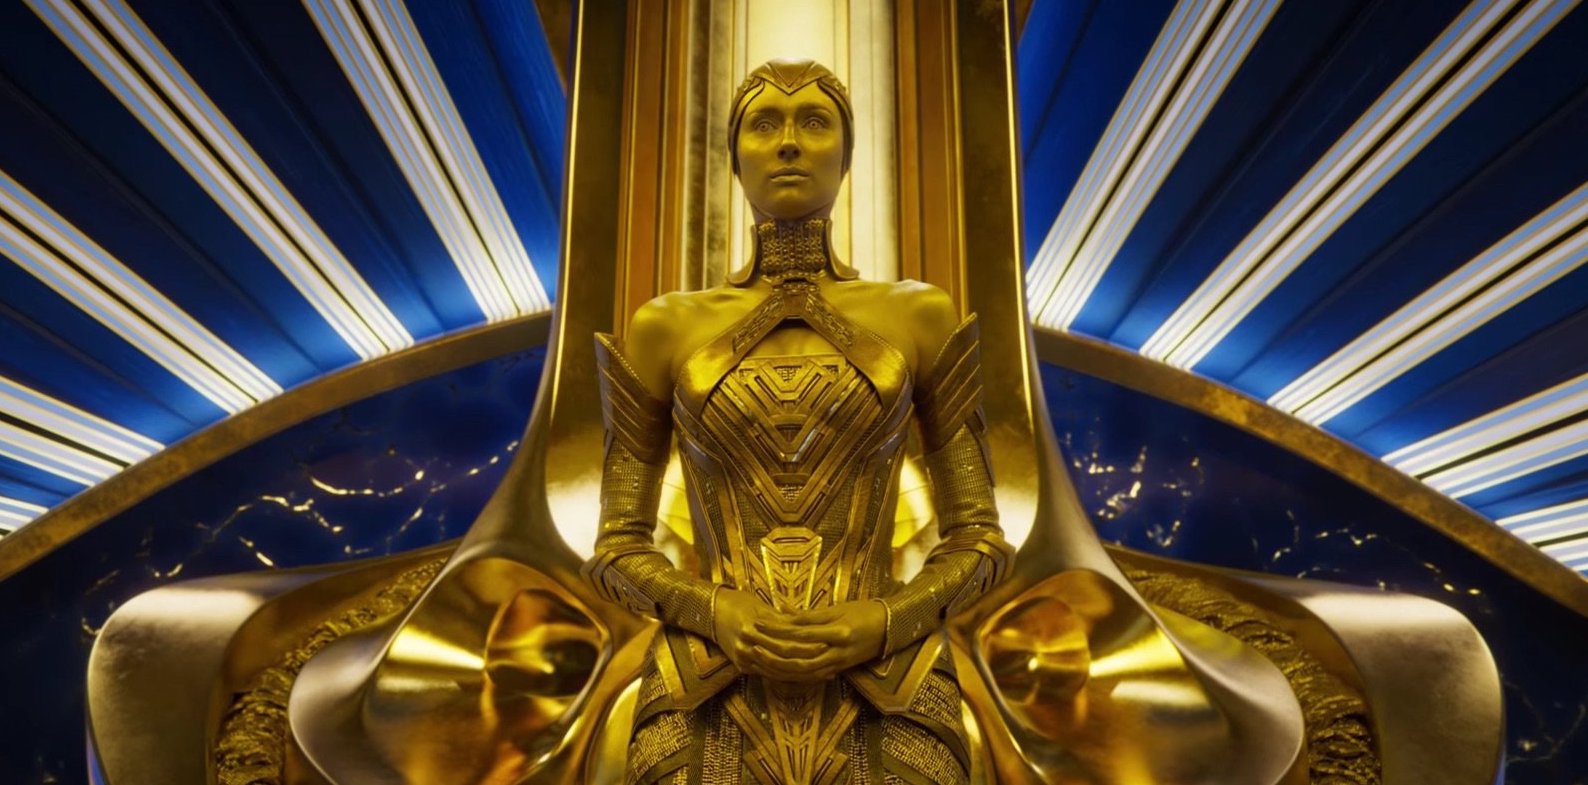 Profile: Get to Know Ayesha in GUARDIANS OF THE GALAXY VOL. 2